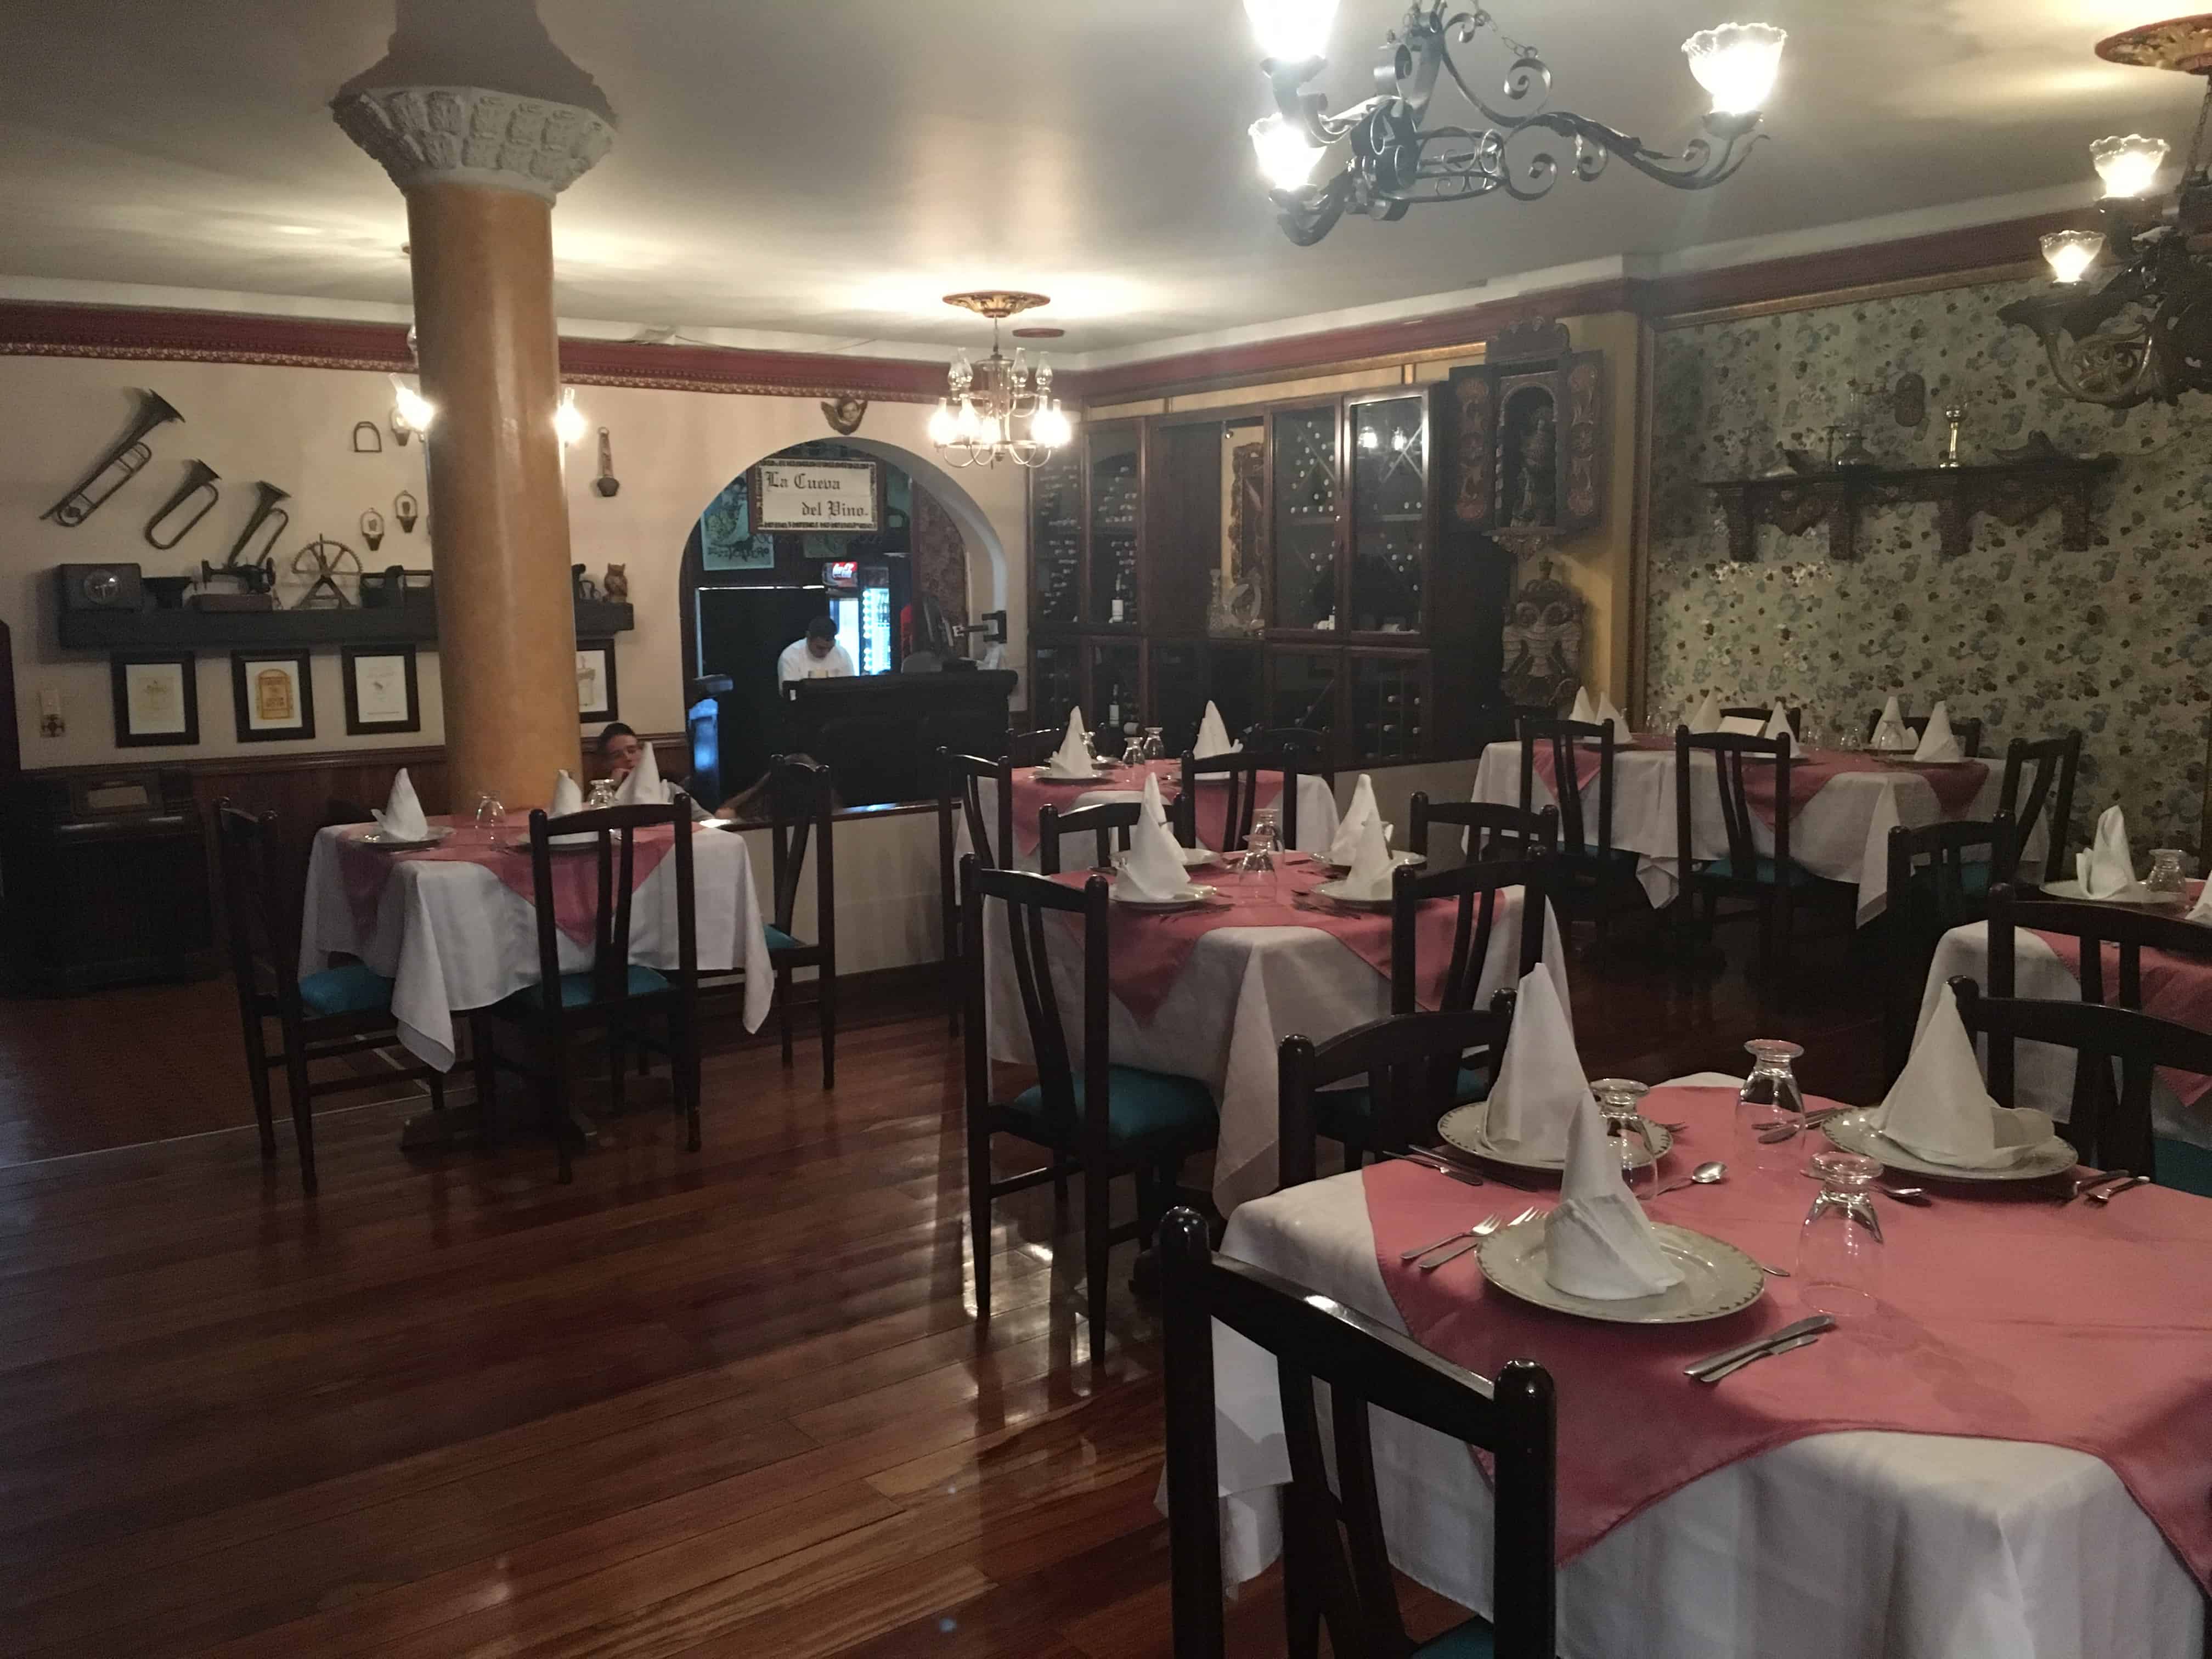 Hotel Camino Real in Popayán, Cauca, Colombia